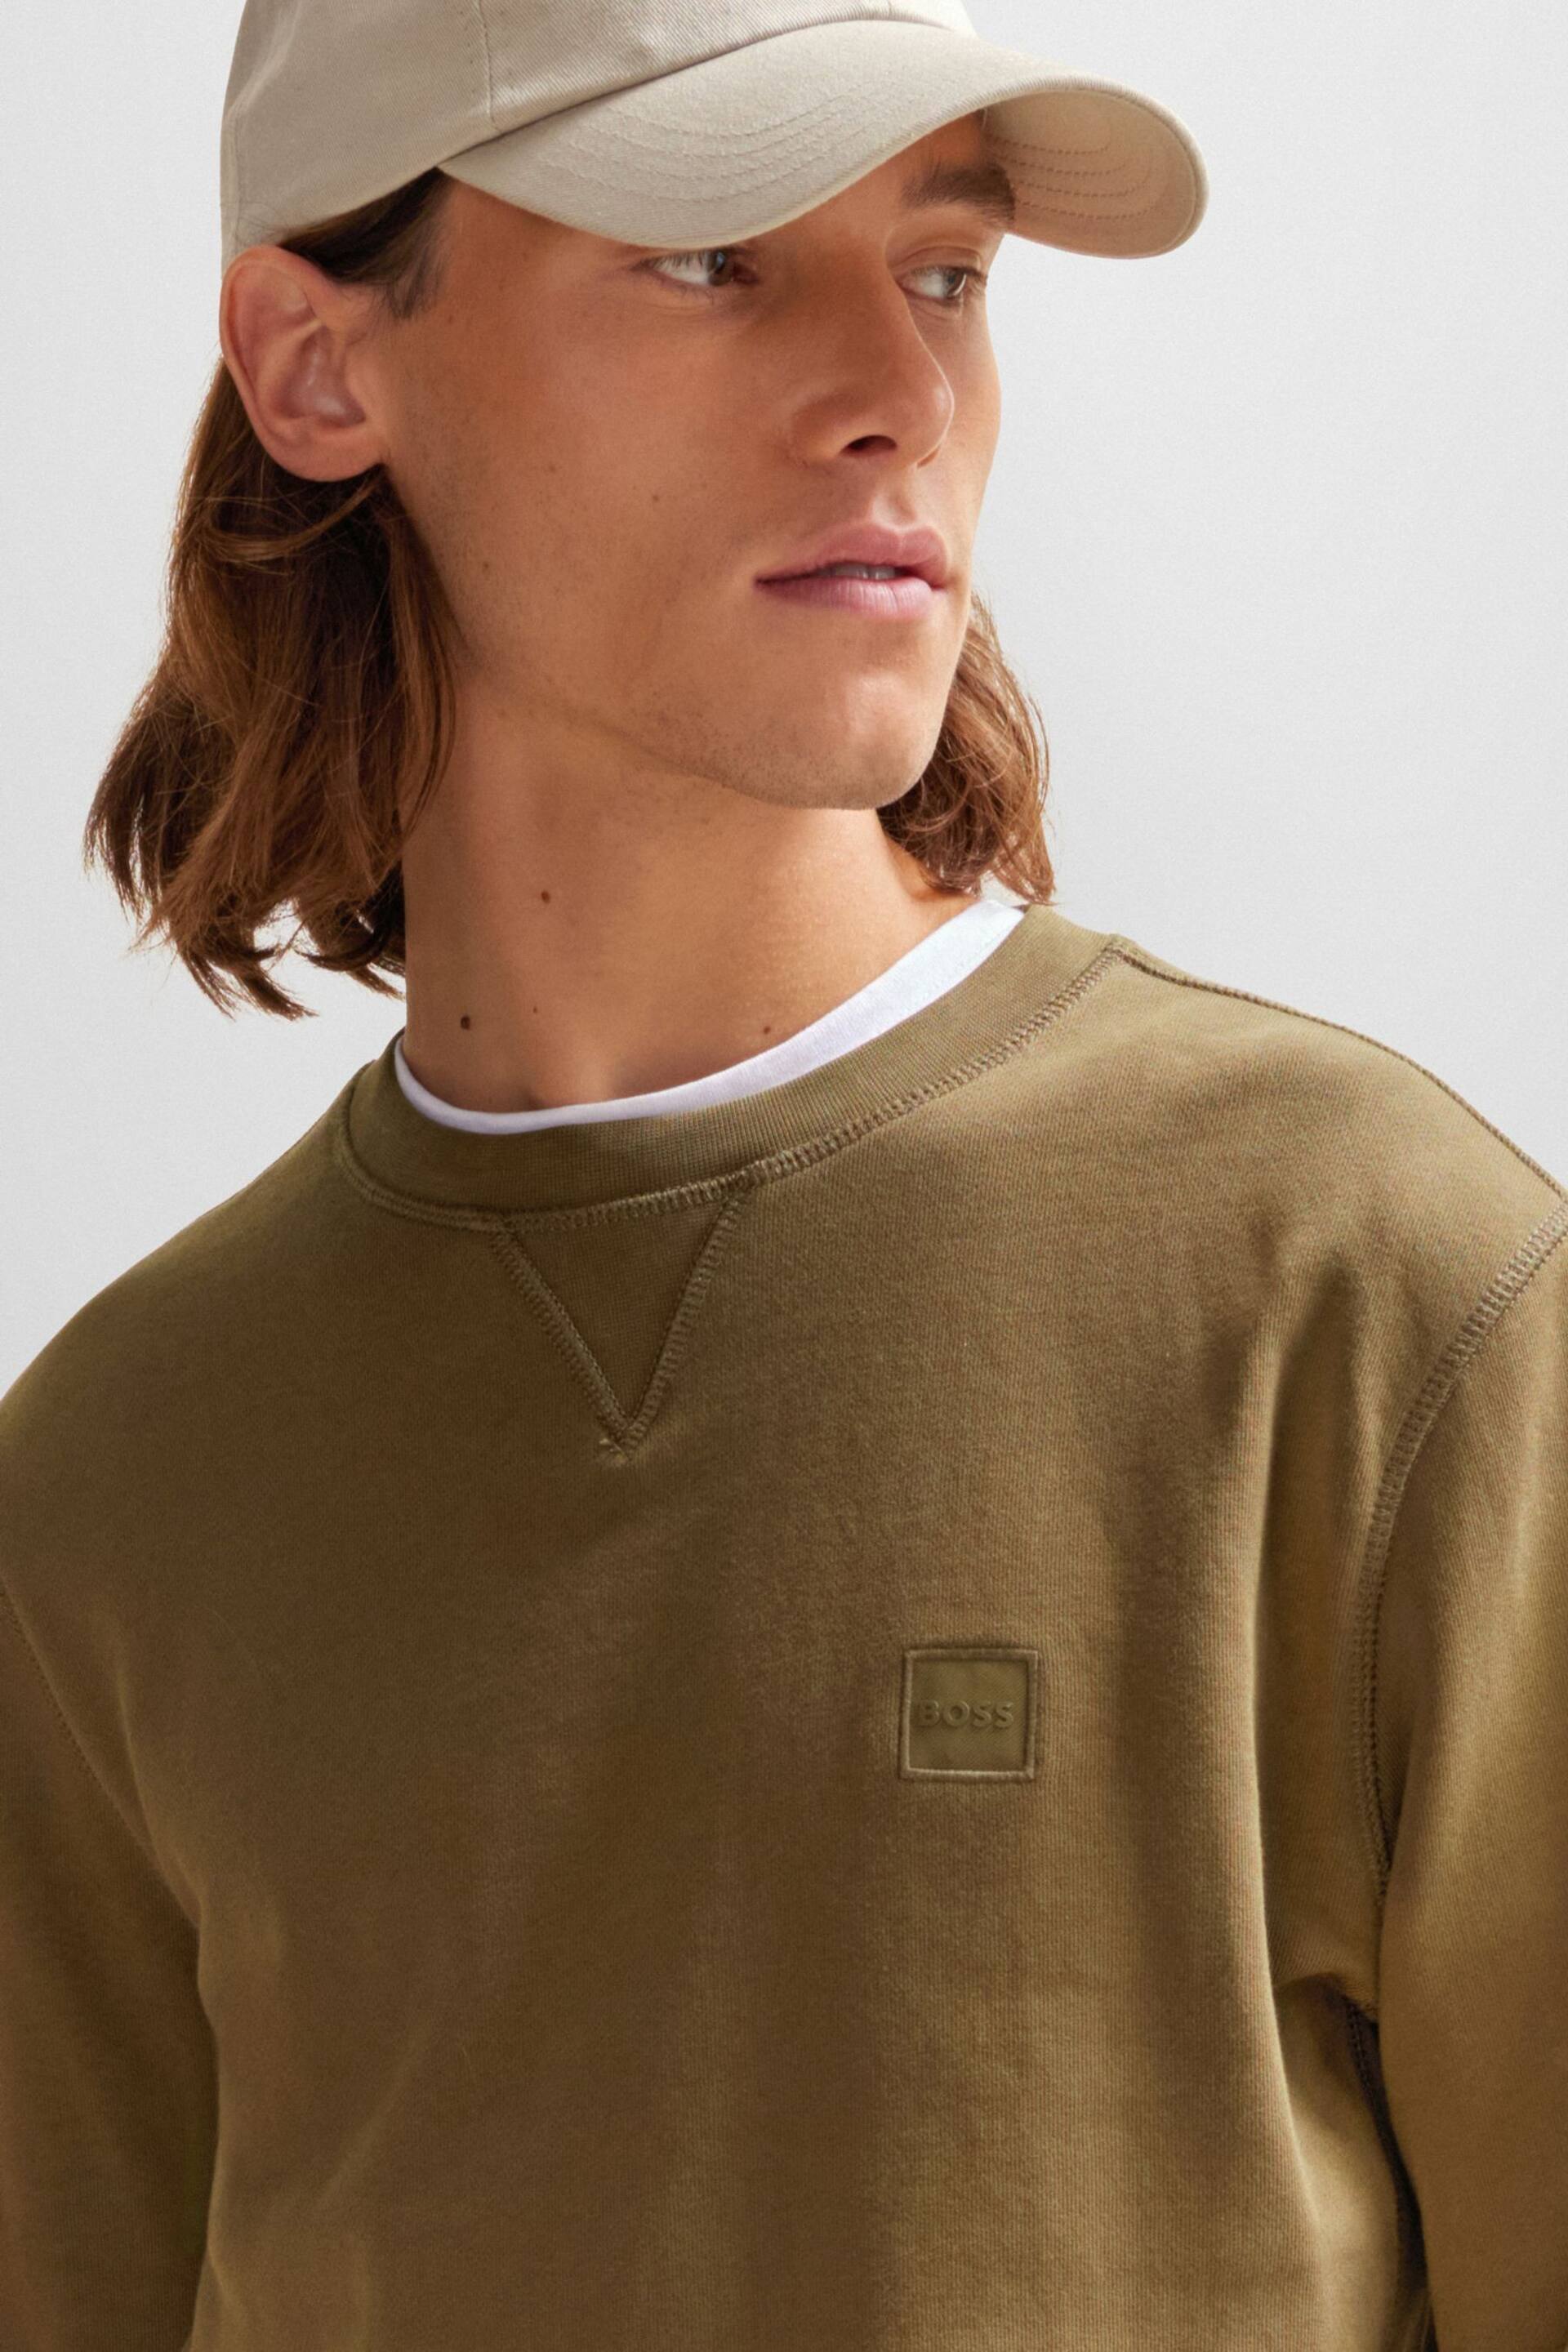 BOSS Green Cotton Terry Relaxed Fit Sweatshirt - Image 4 of 5